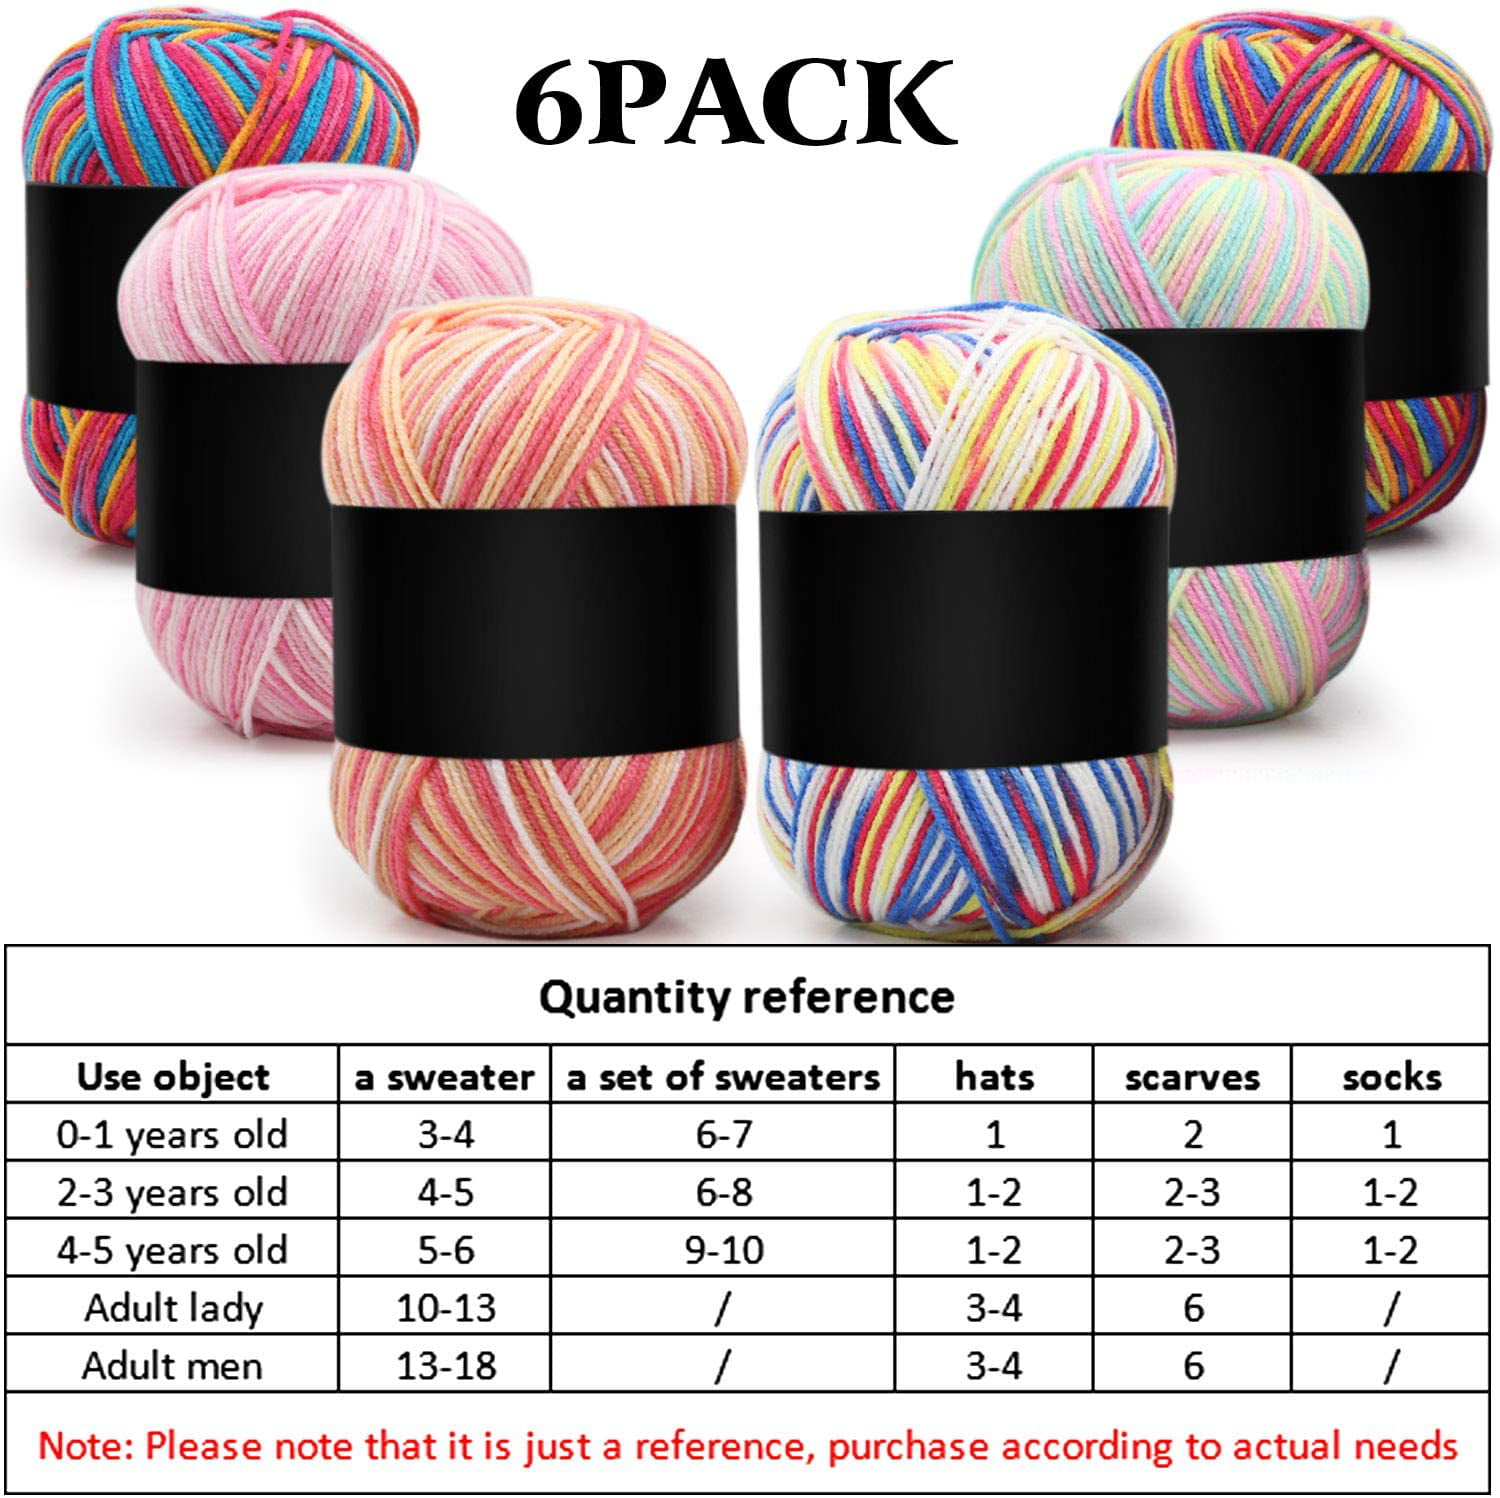 6 Pack Beginners Crochet Yarn with Stuffing, Rainbow Brown Pink Blue Yarn for Crocheting Knitting Beginners, Easy-to-See Stitches, Chunky Thick